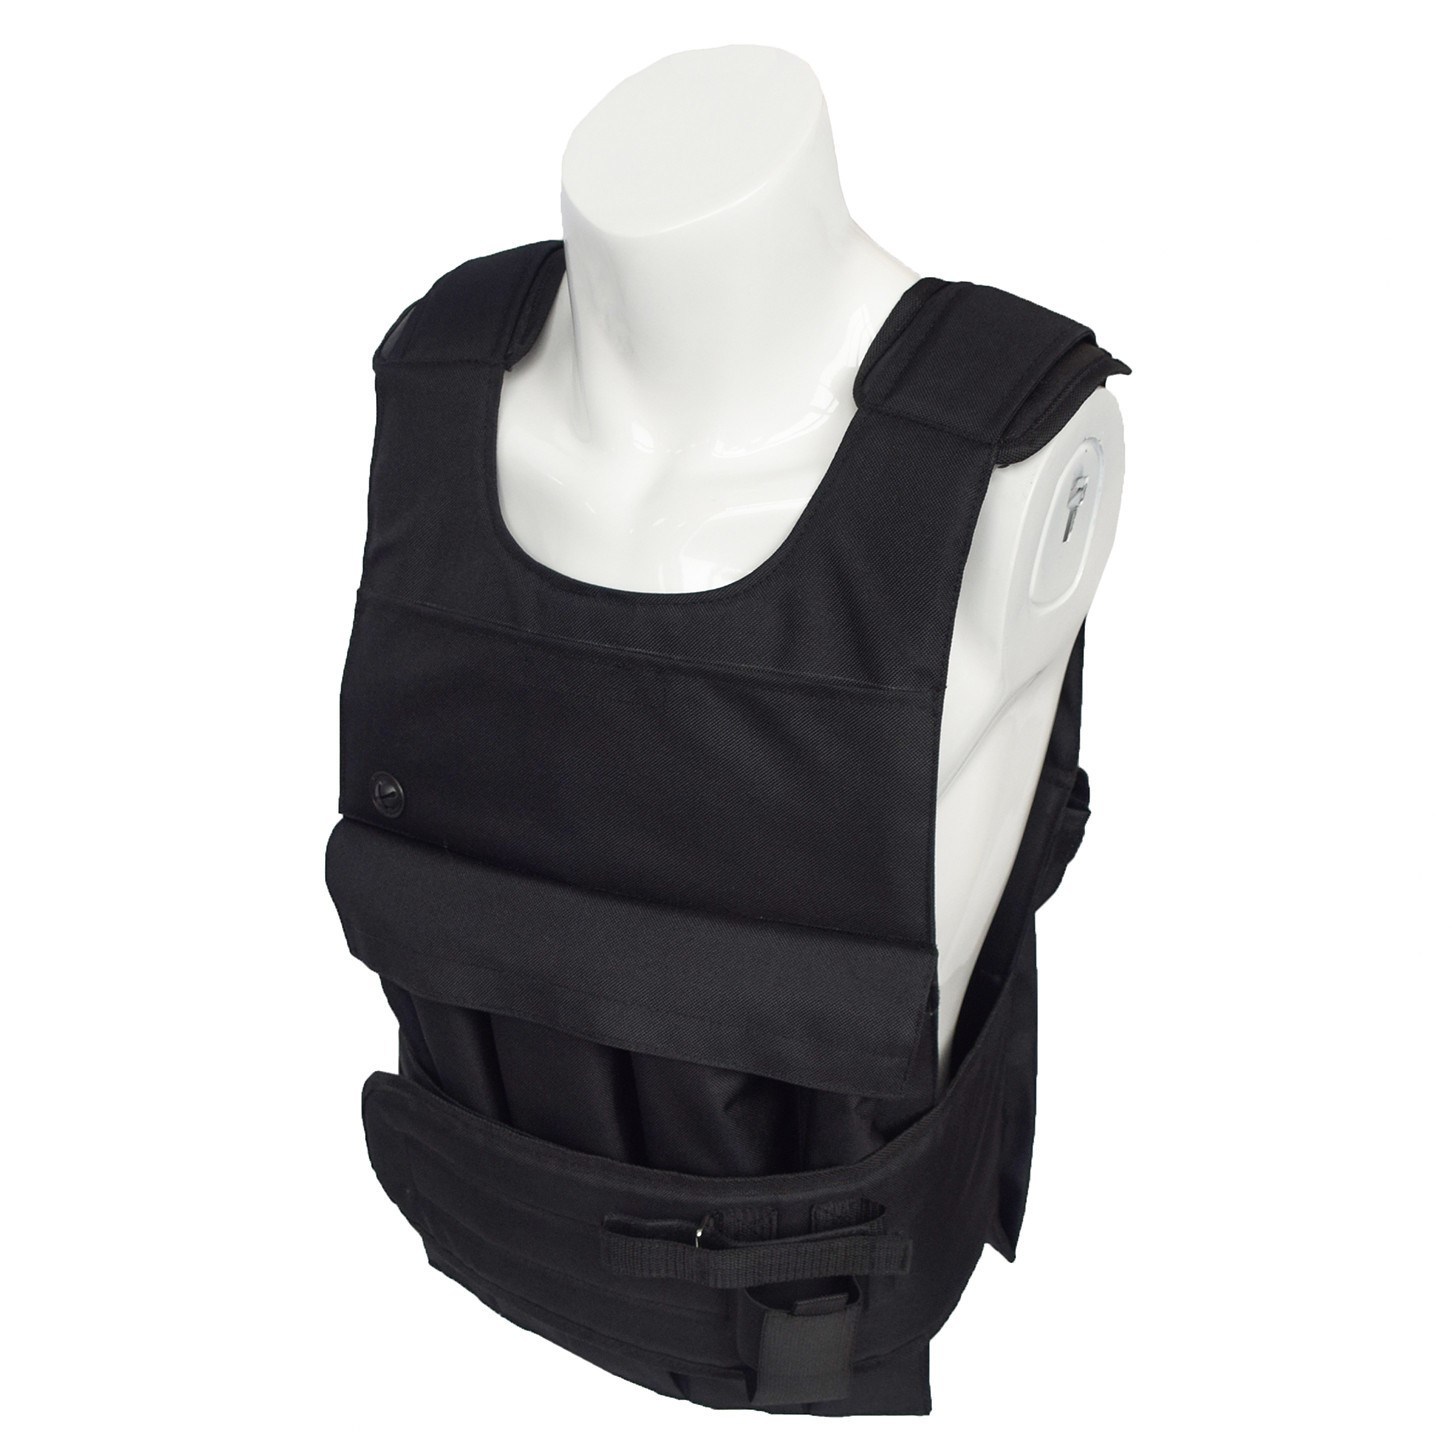 Other Police Tactical Vest Military Vest Military Green Ak47 Military Bullet Proof Vest